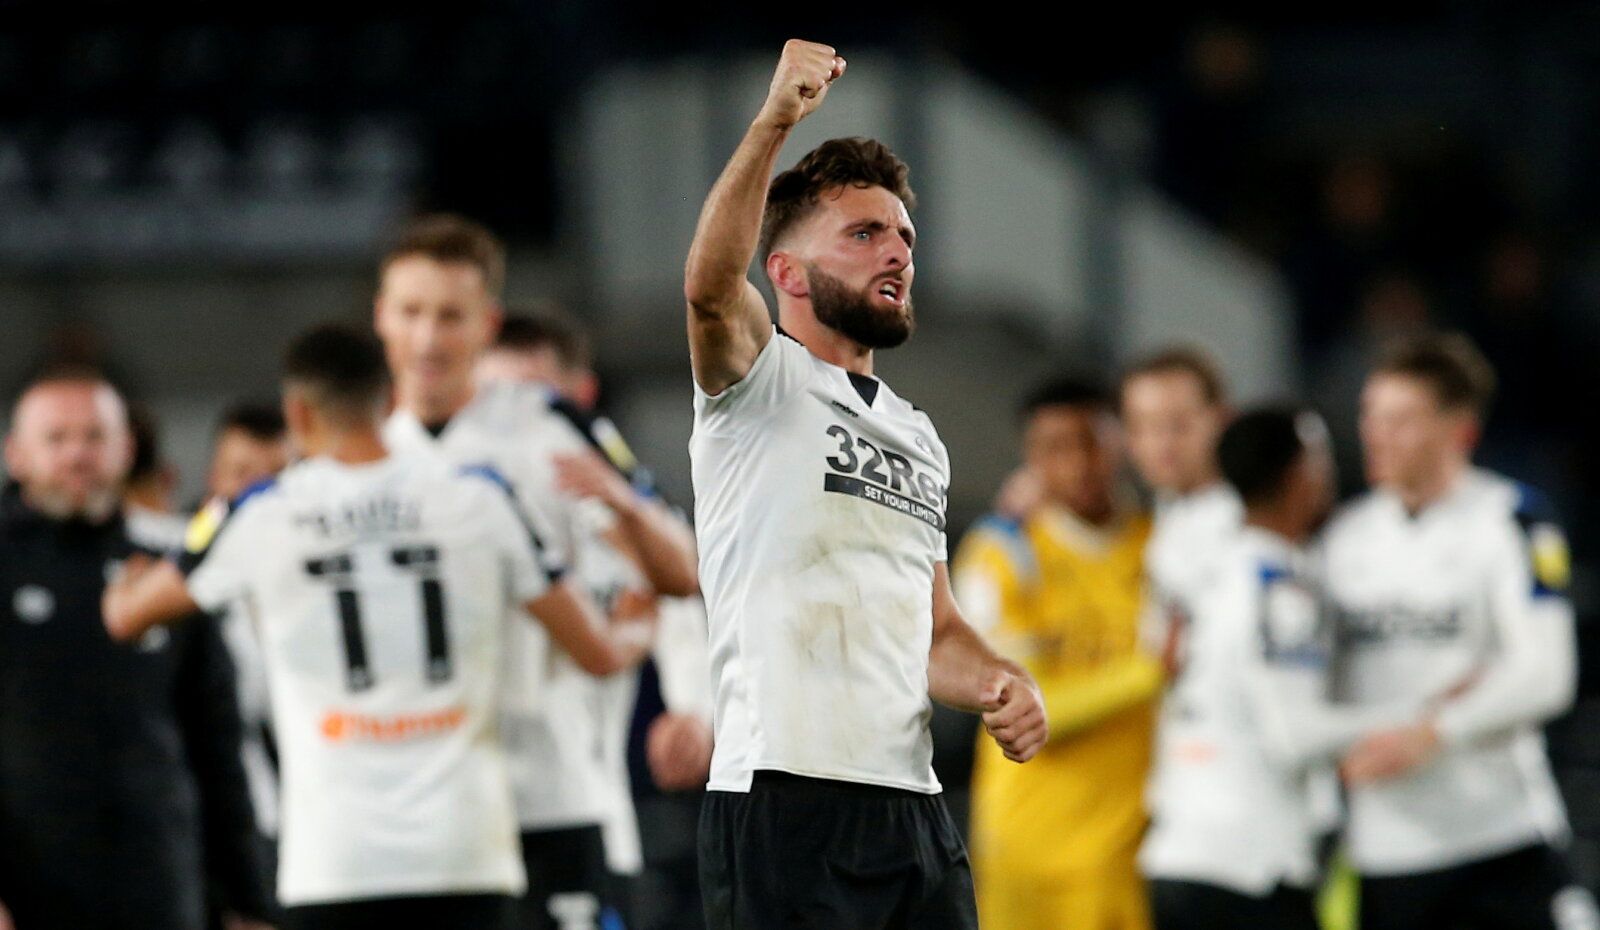 Soccer Football - Championship - Derby County v Reading - Pride Park, Derby, Britain - September 29, 2021 Derby County's Graeme Shinnie celebrates after the match  Action Images/Craig Brough  EDITORIAL USE ONLY. No use with unauthorized audio, video, data, fixture lists, club/league logos or 